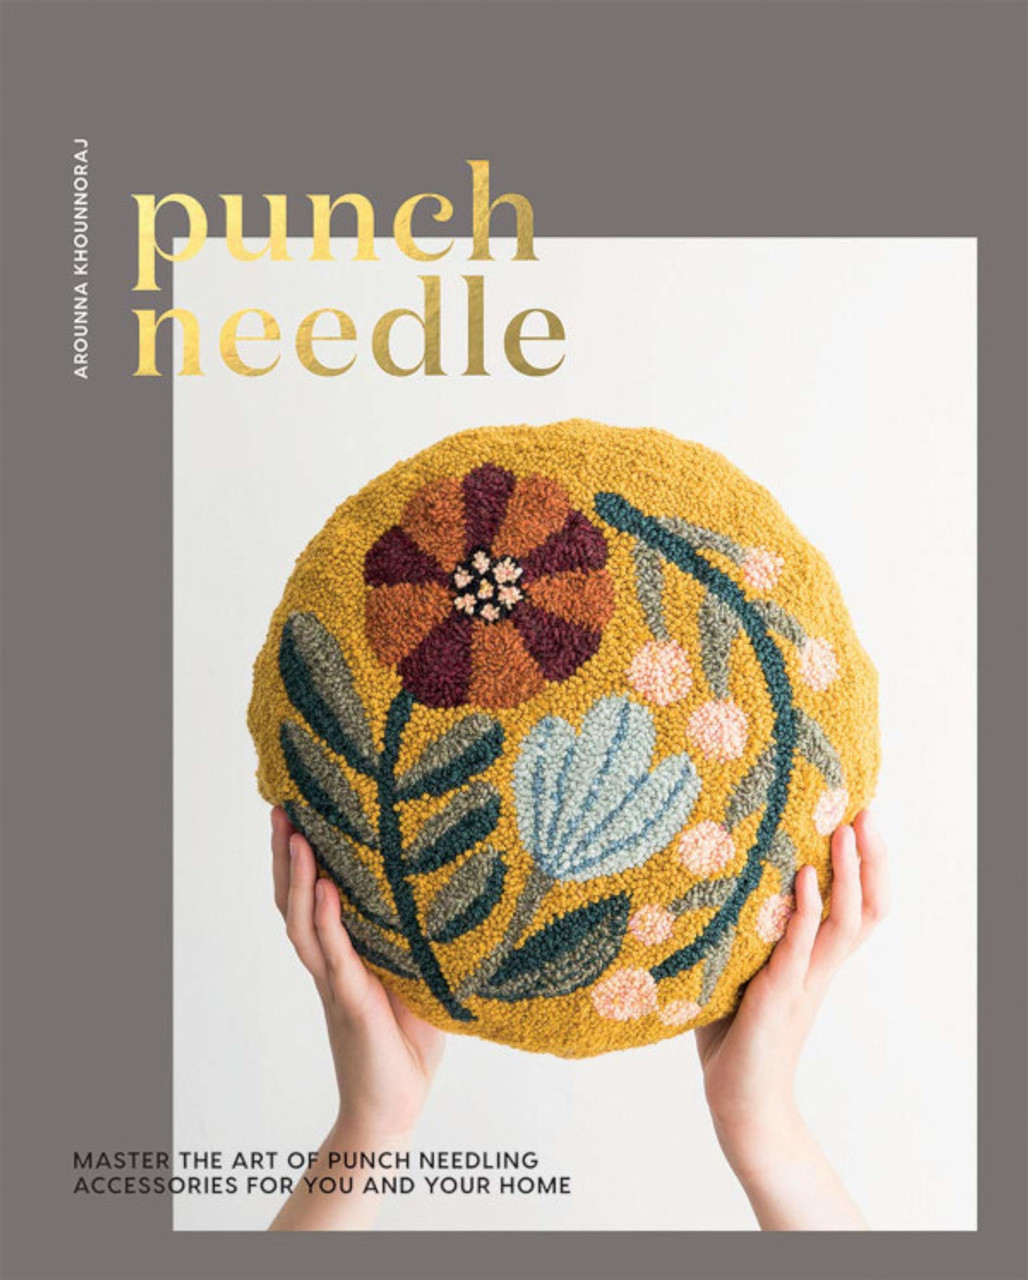 5 Punch Needle Artists You Need to Know